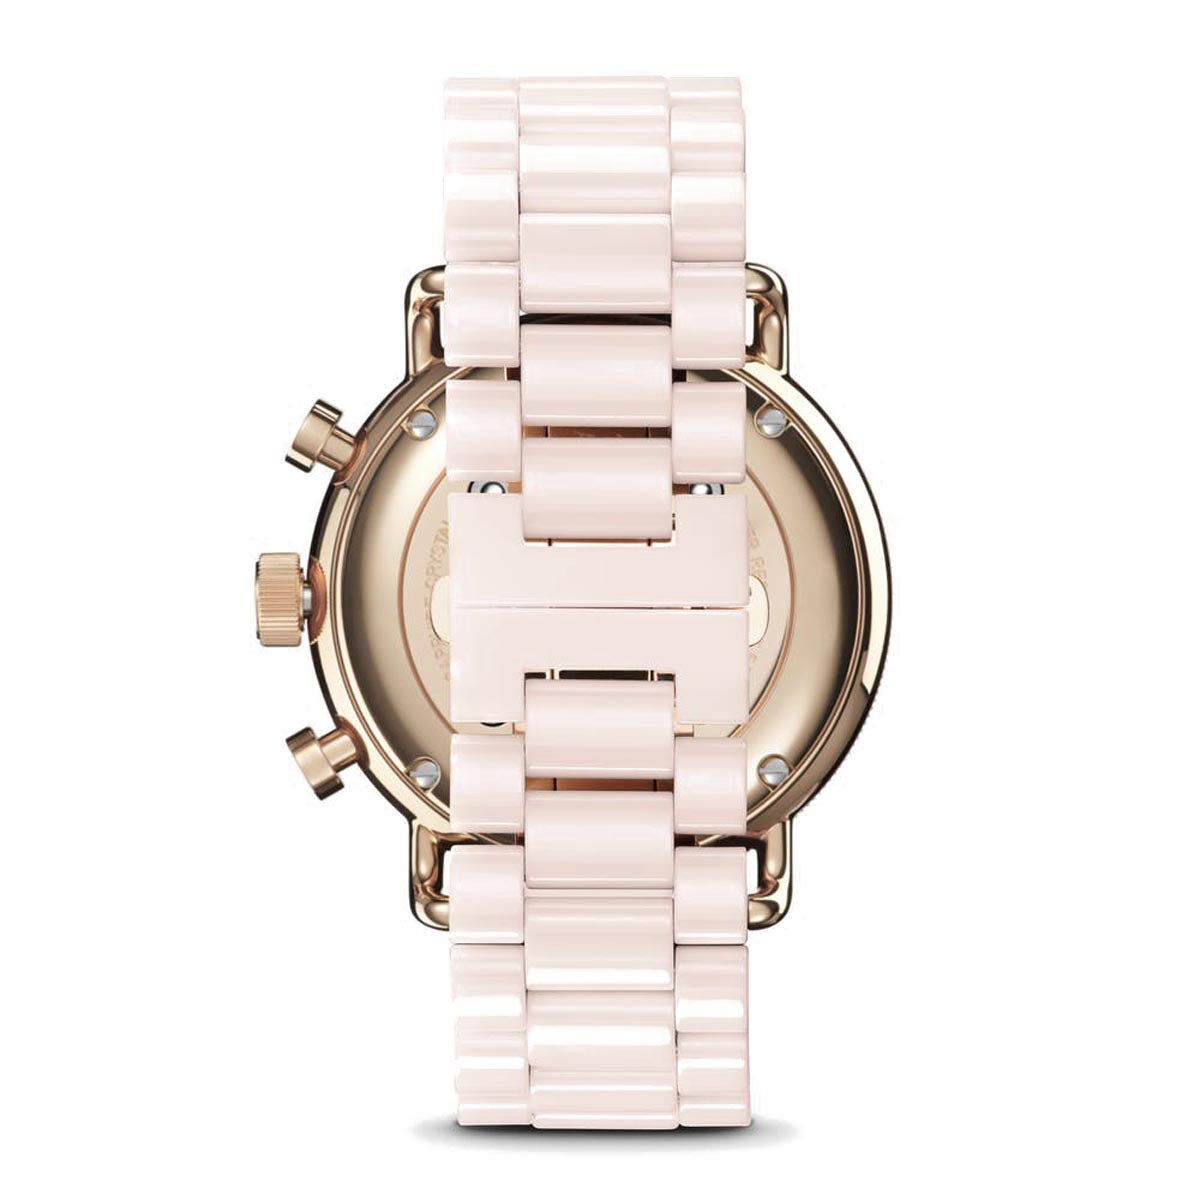 Shinola Canfield Sport Chronograph Watch with White Mother of Pearl Dial and Blush Ceramic Bracelet (quartz movement)